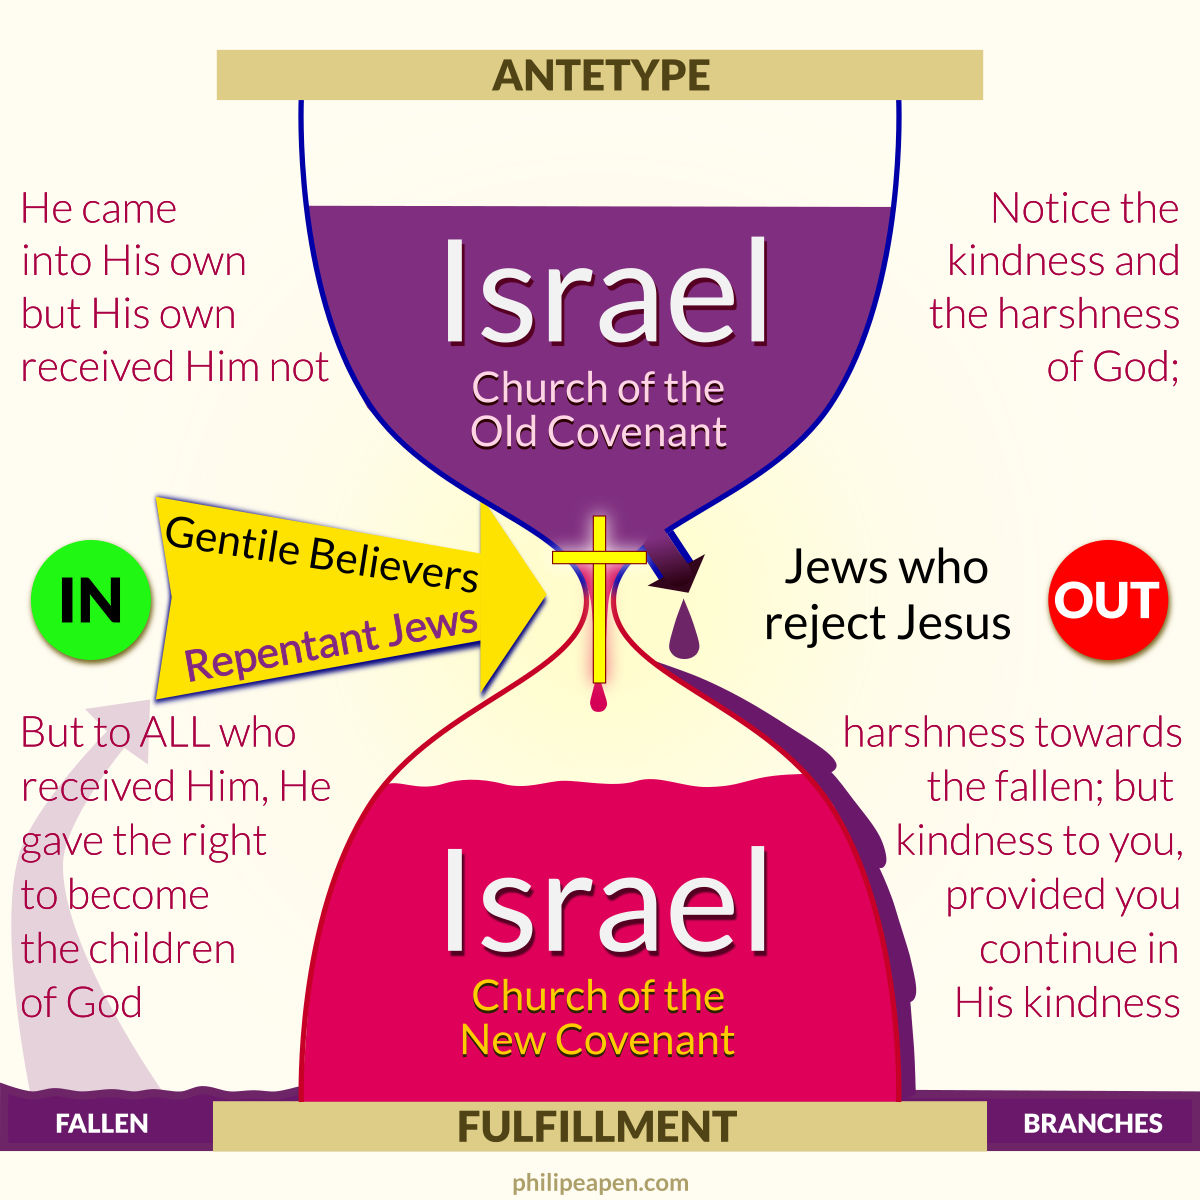 God had prepared Israel of the Old Covenant to receive Jesus the Messiah. He was the true Israelite. Everyone had fallen away. But, except for a few who believed, the Jews rejected Jesus. As a result, they were cast out of God's Israel. Gentiles who received Jesus, along with the few Jewish disciples, formed the initial Church of the New Testament.